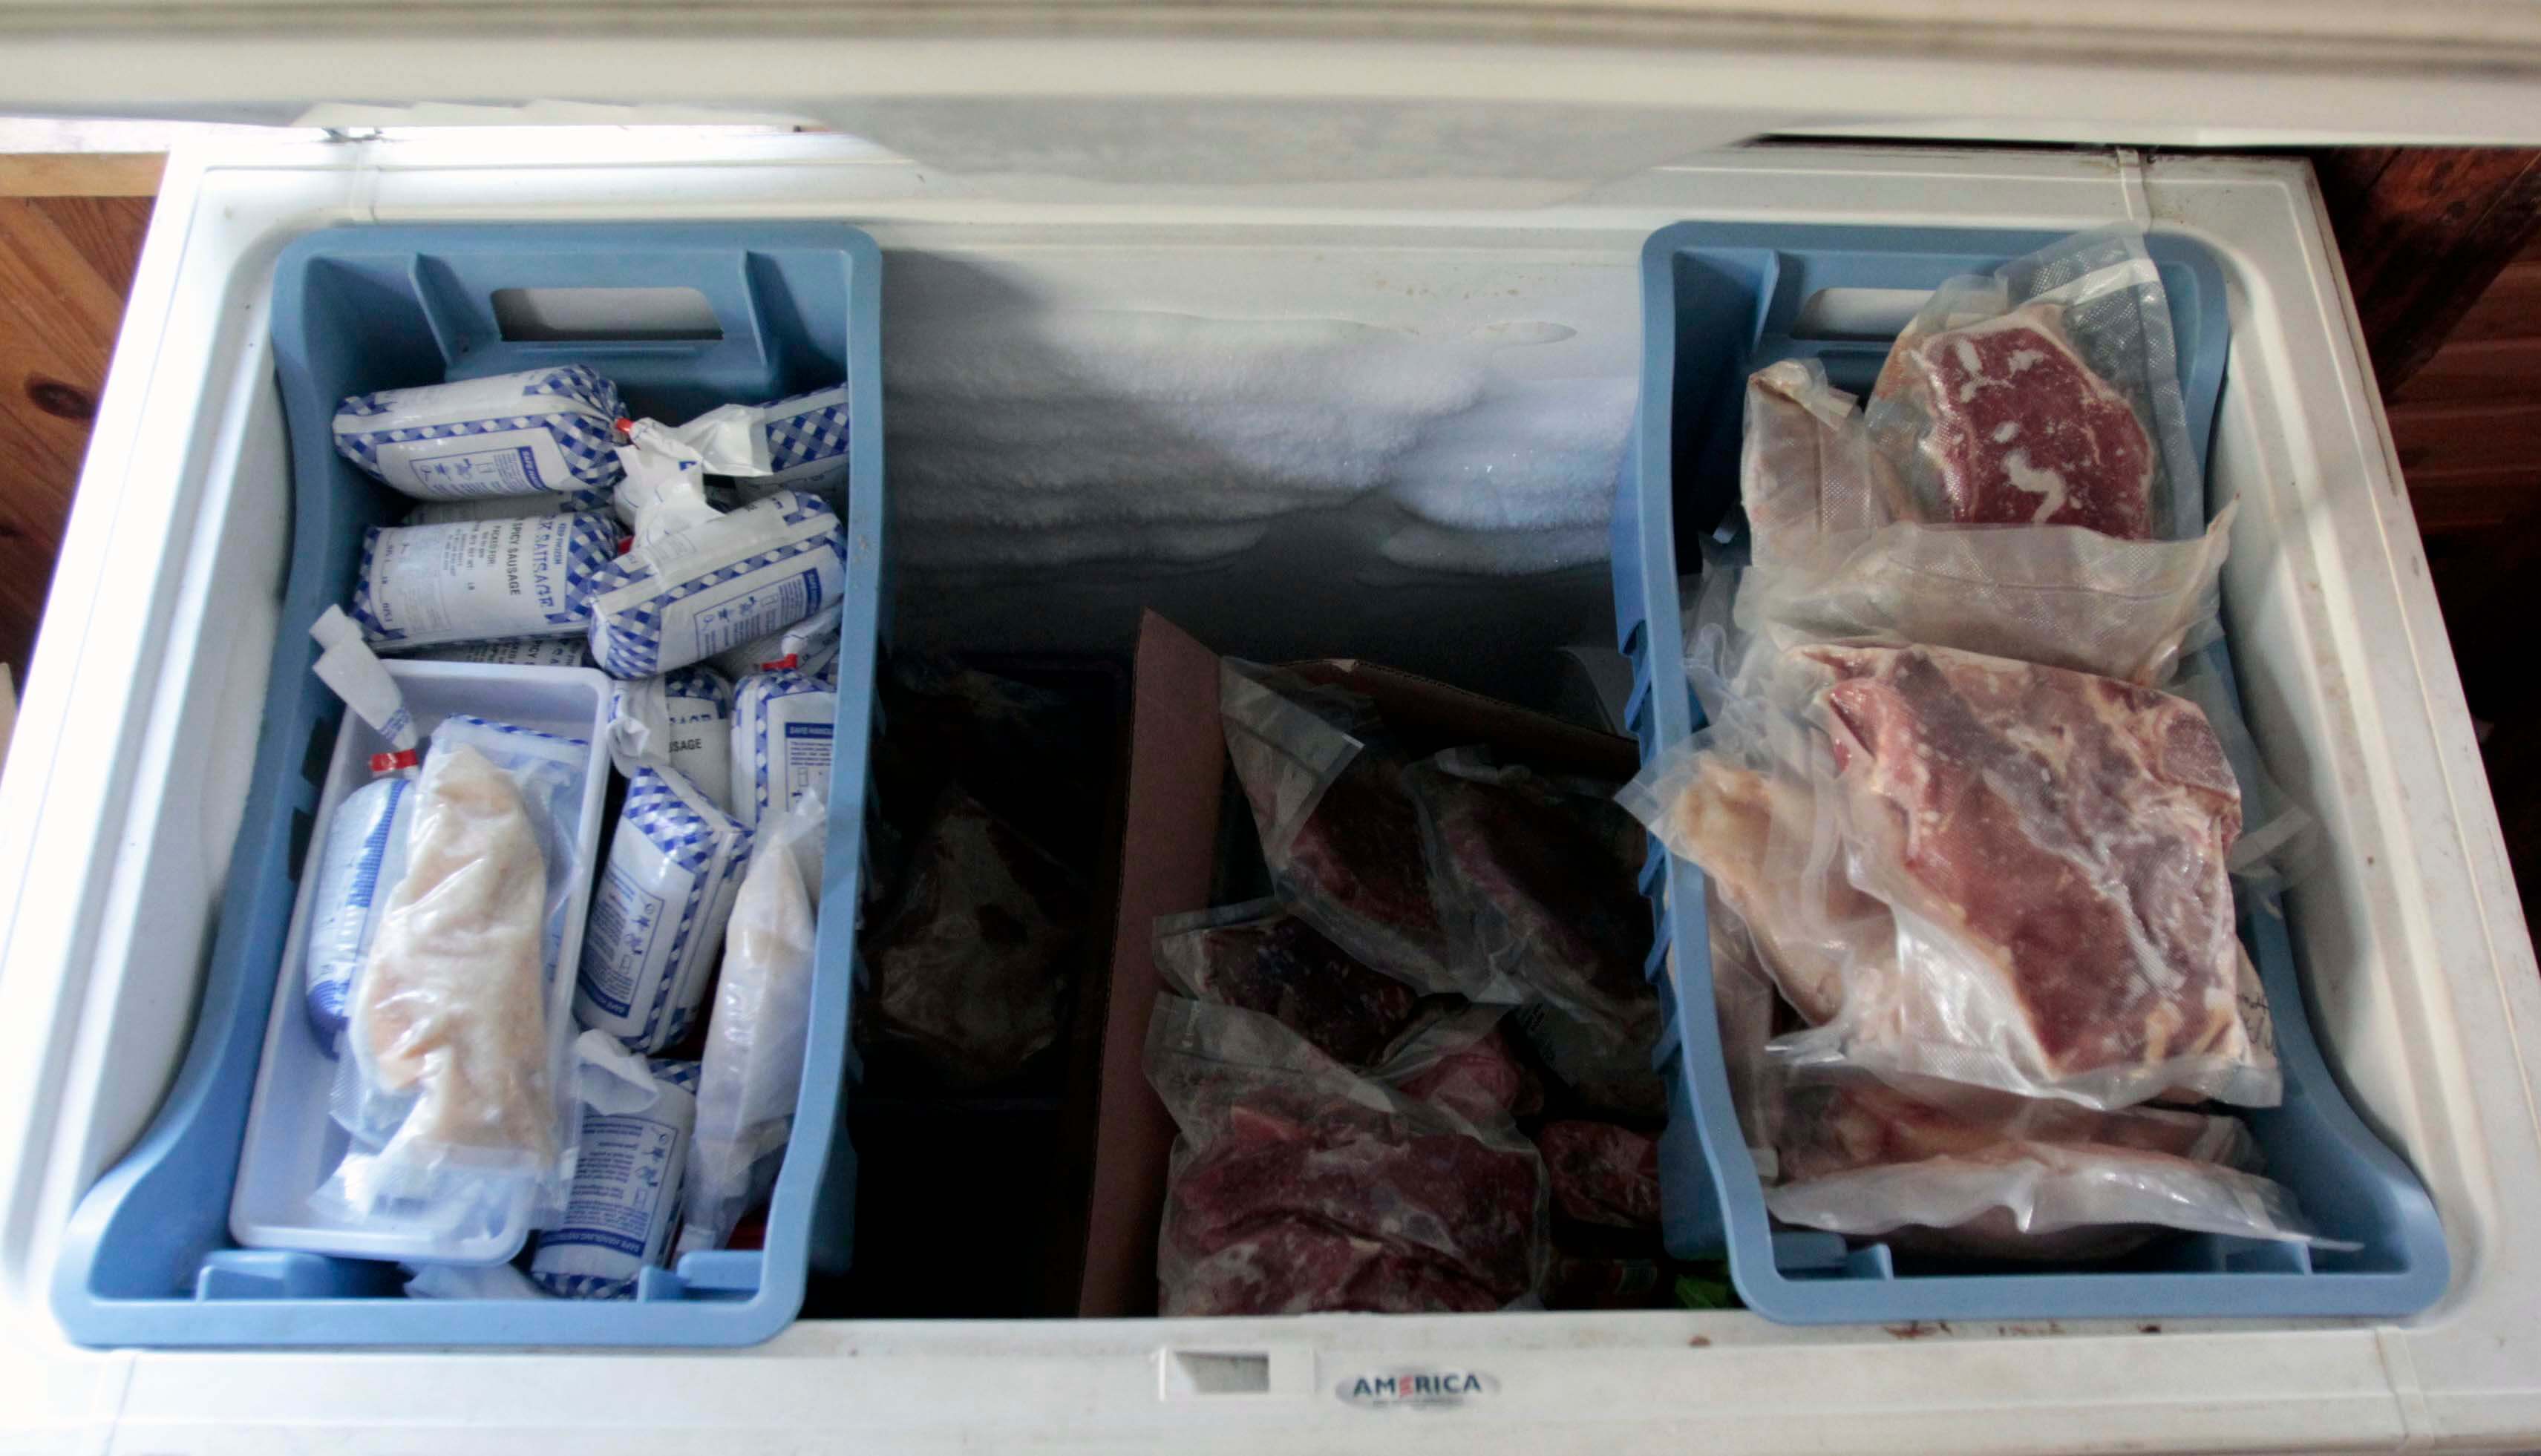 An overhead view of Suzanne's freezer filled with pike, pork, cattle, deer, and elk meat. (April 2020)